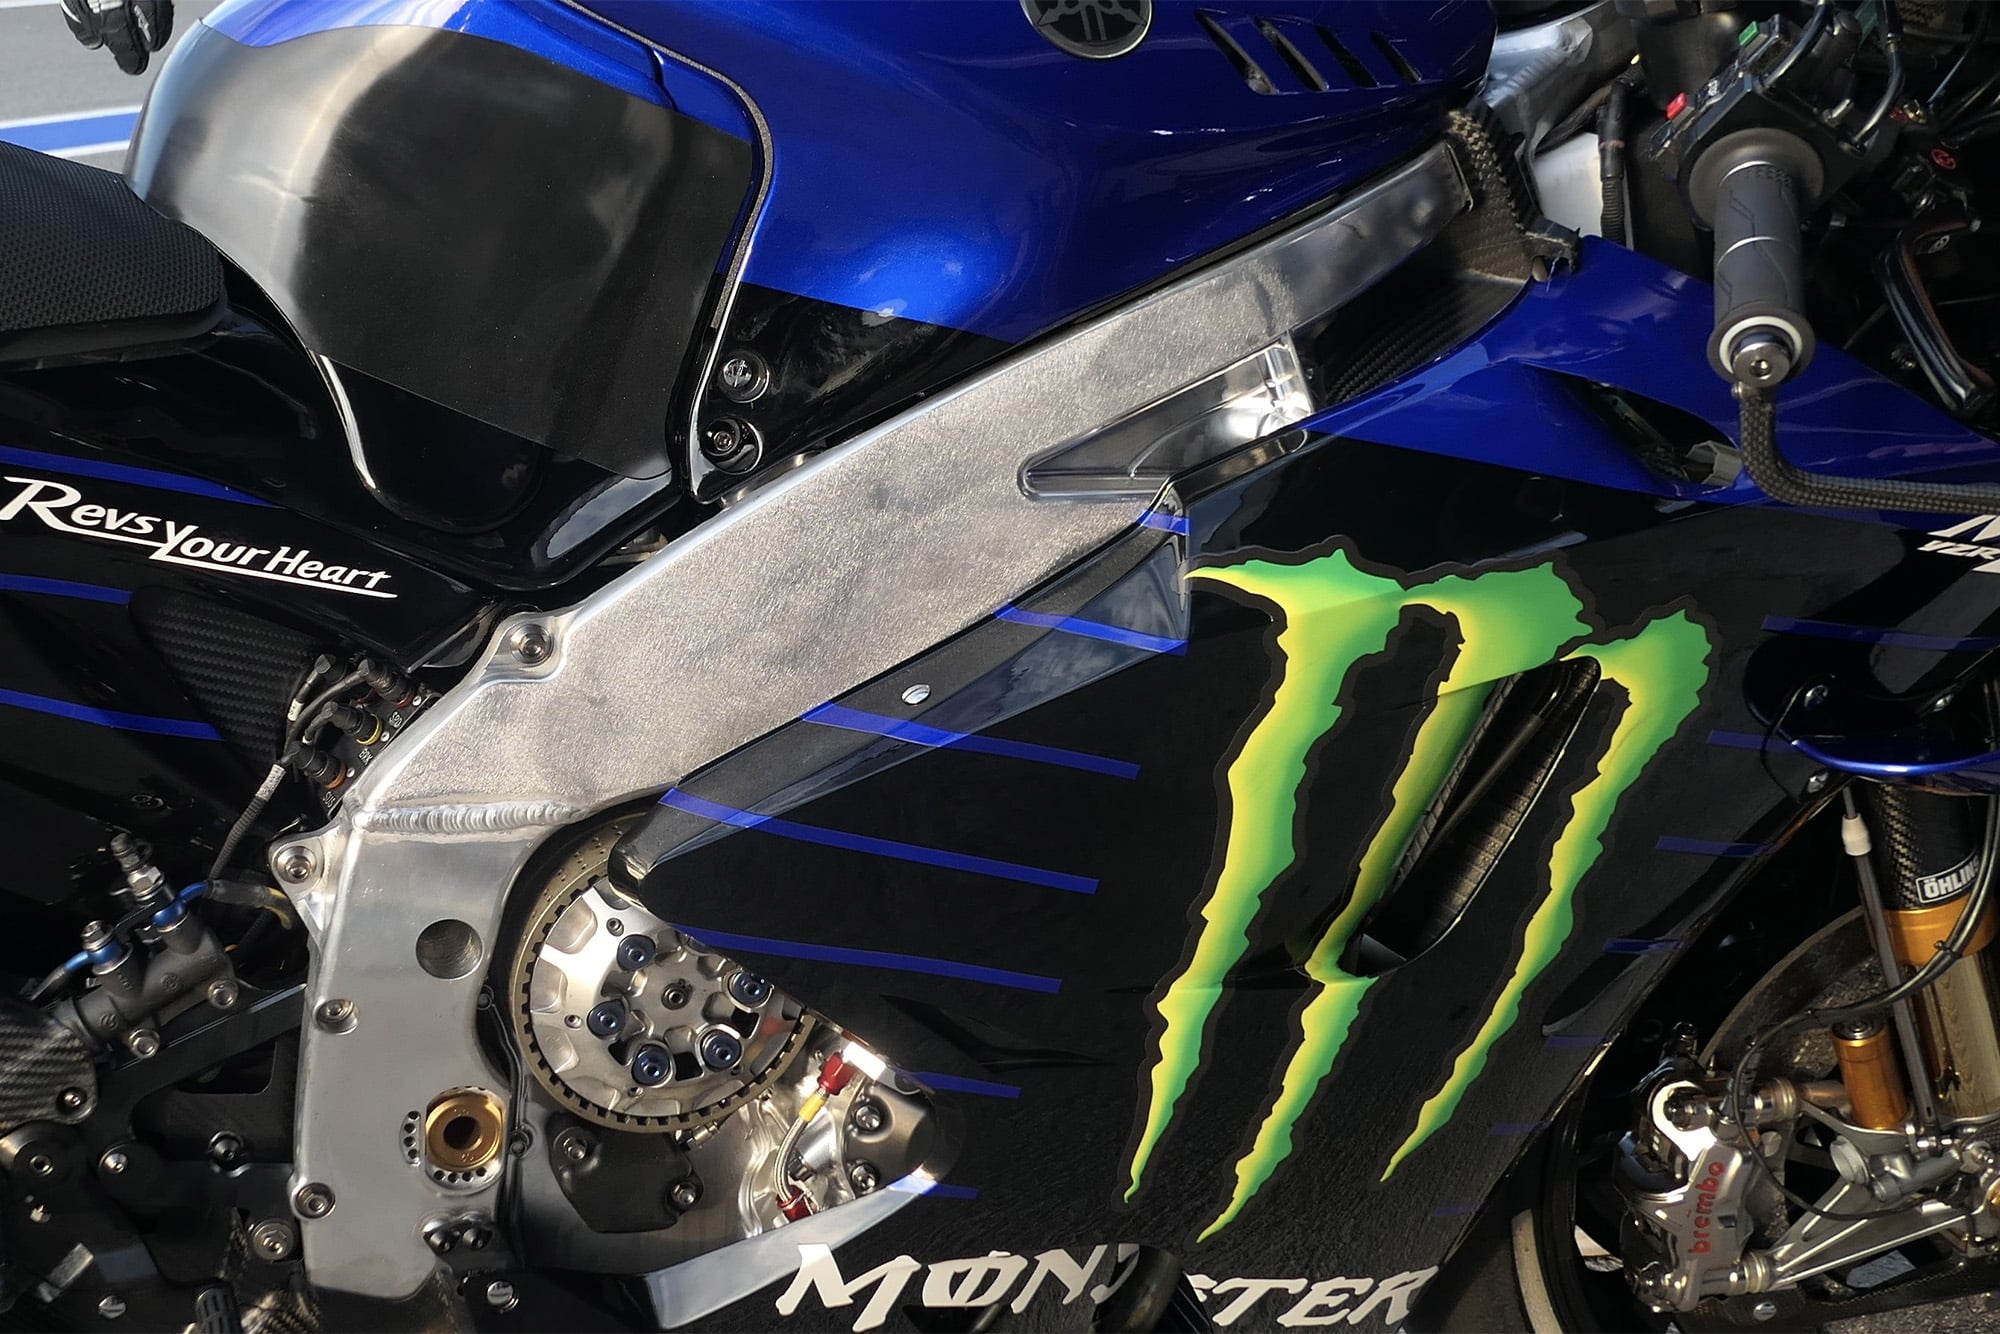 Yamaha's prototype 2020 frame: will it suit the latest riding techniques?